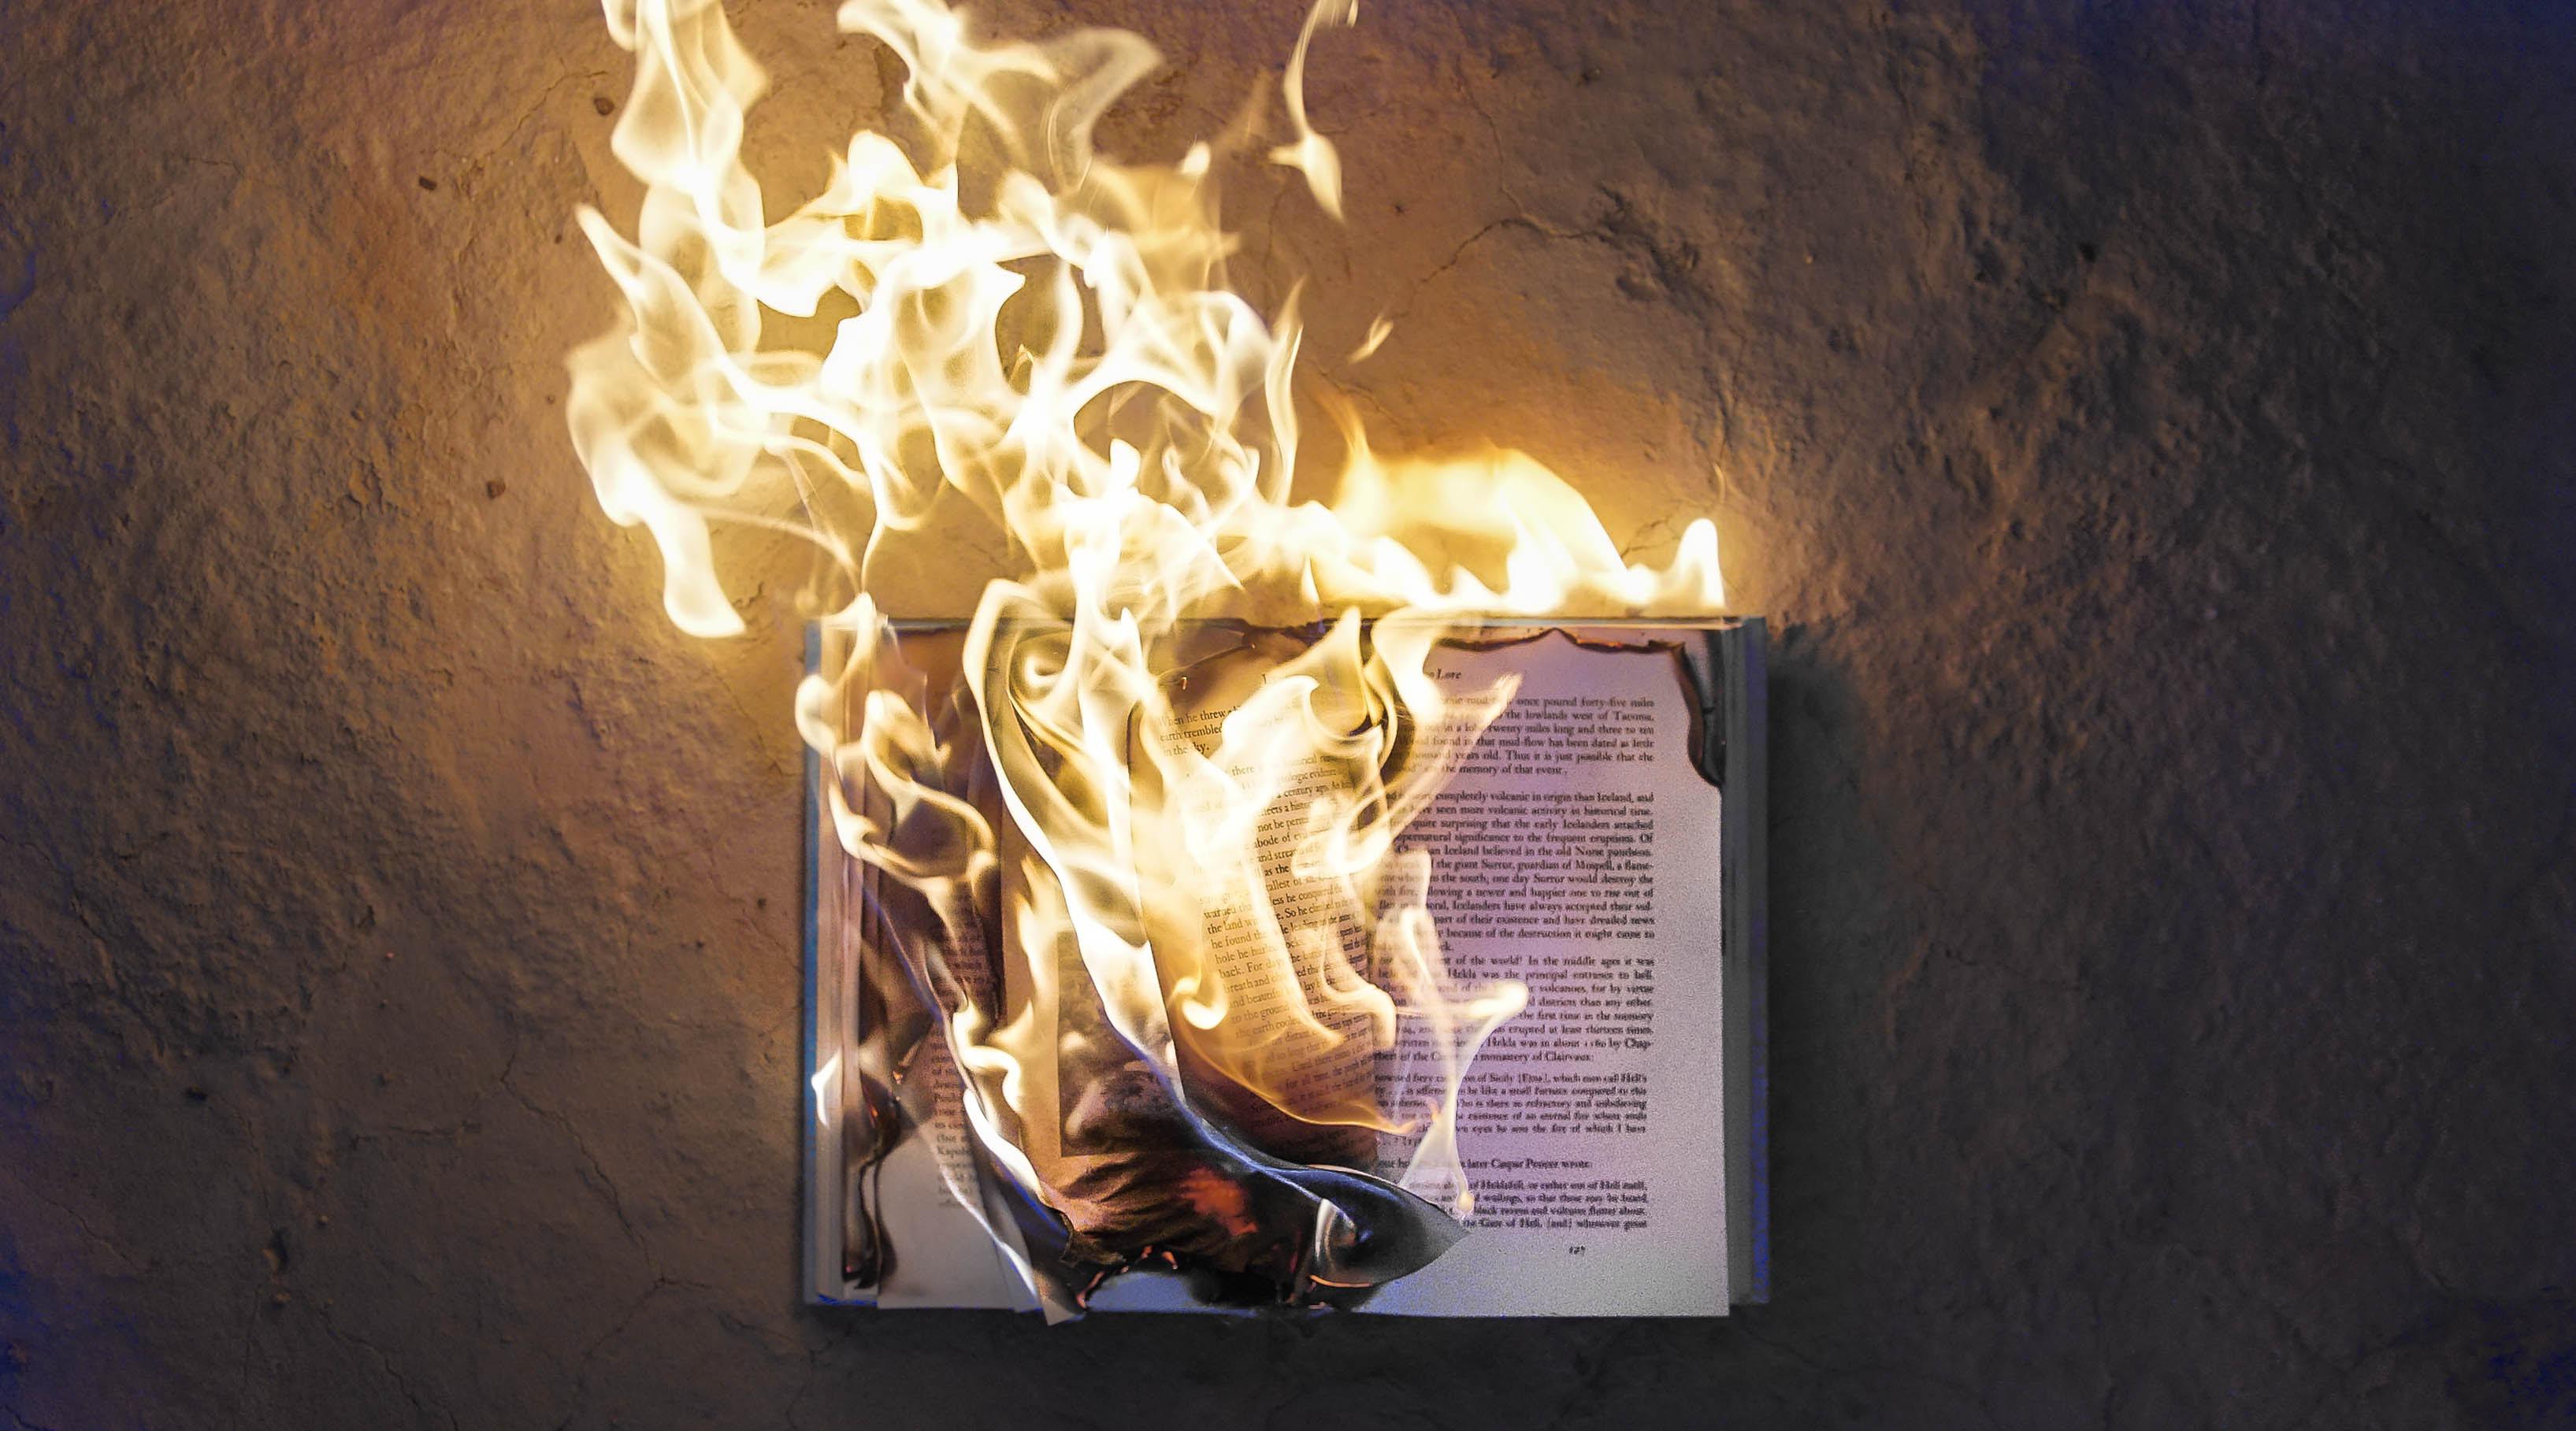 Photograph of a book burning